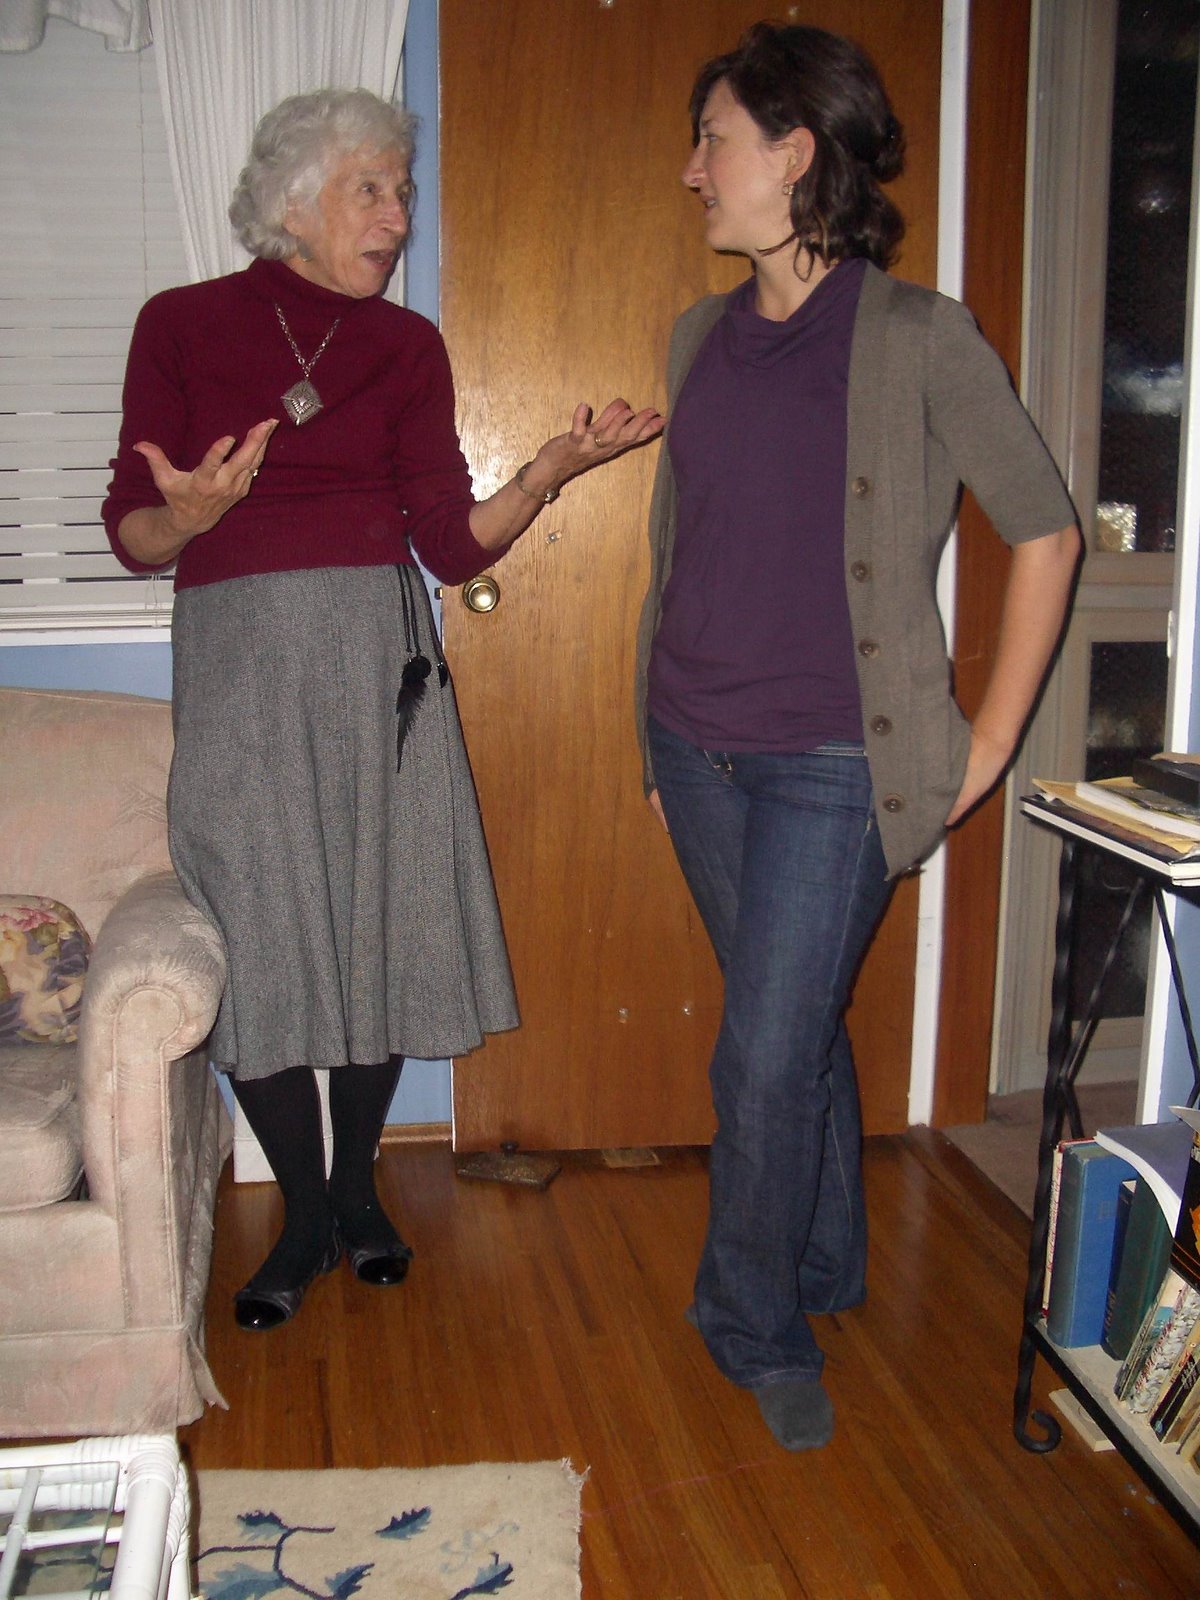 Dressing to Please Ourselves, Part II — daughter and granny!